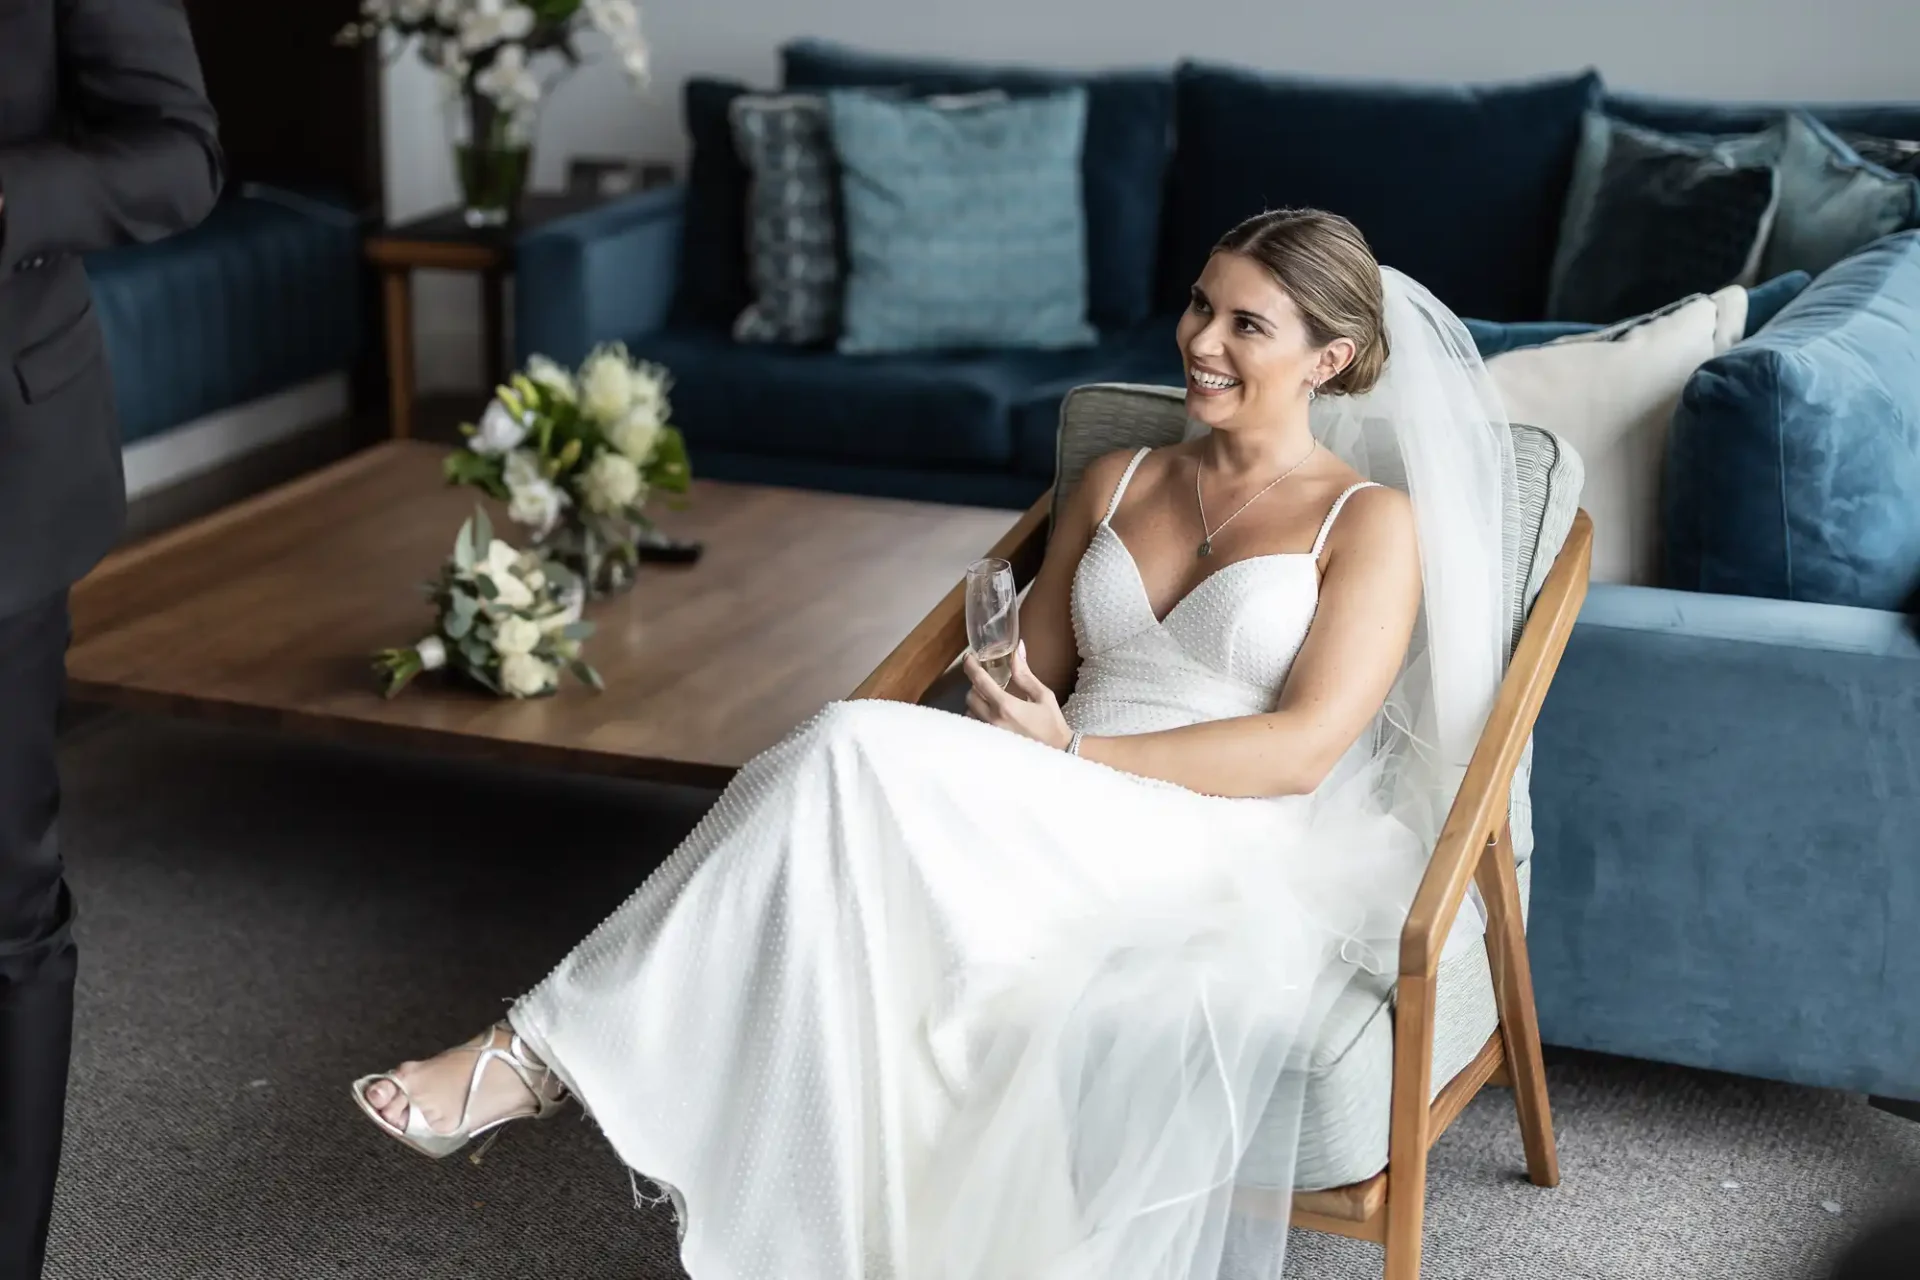 A bride in a white dress smiling, seated on a chair in a modern living room, holding a glass, with a man's torso visible on the left.